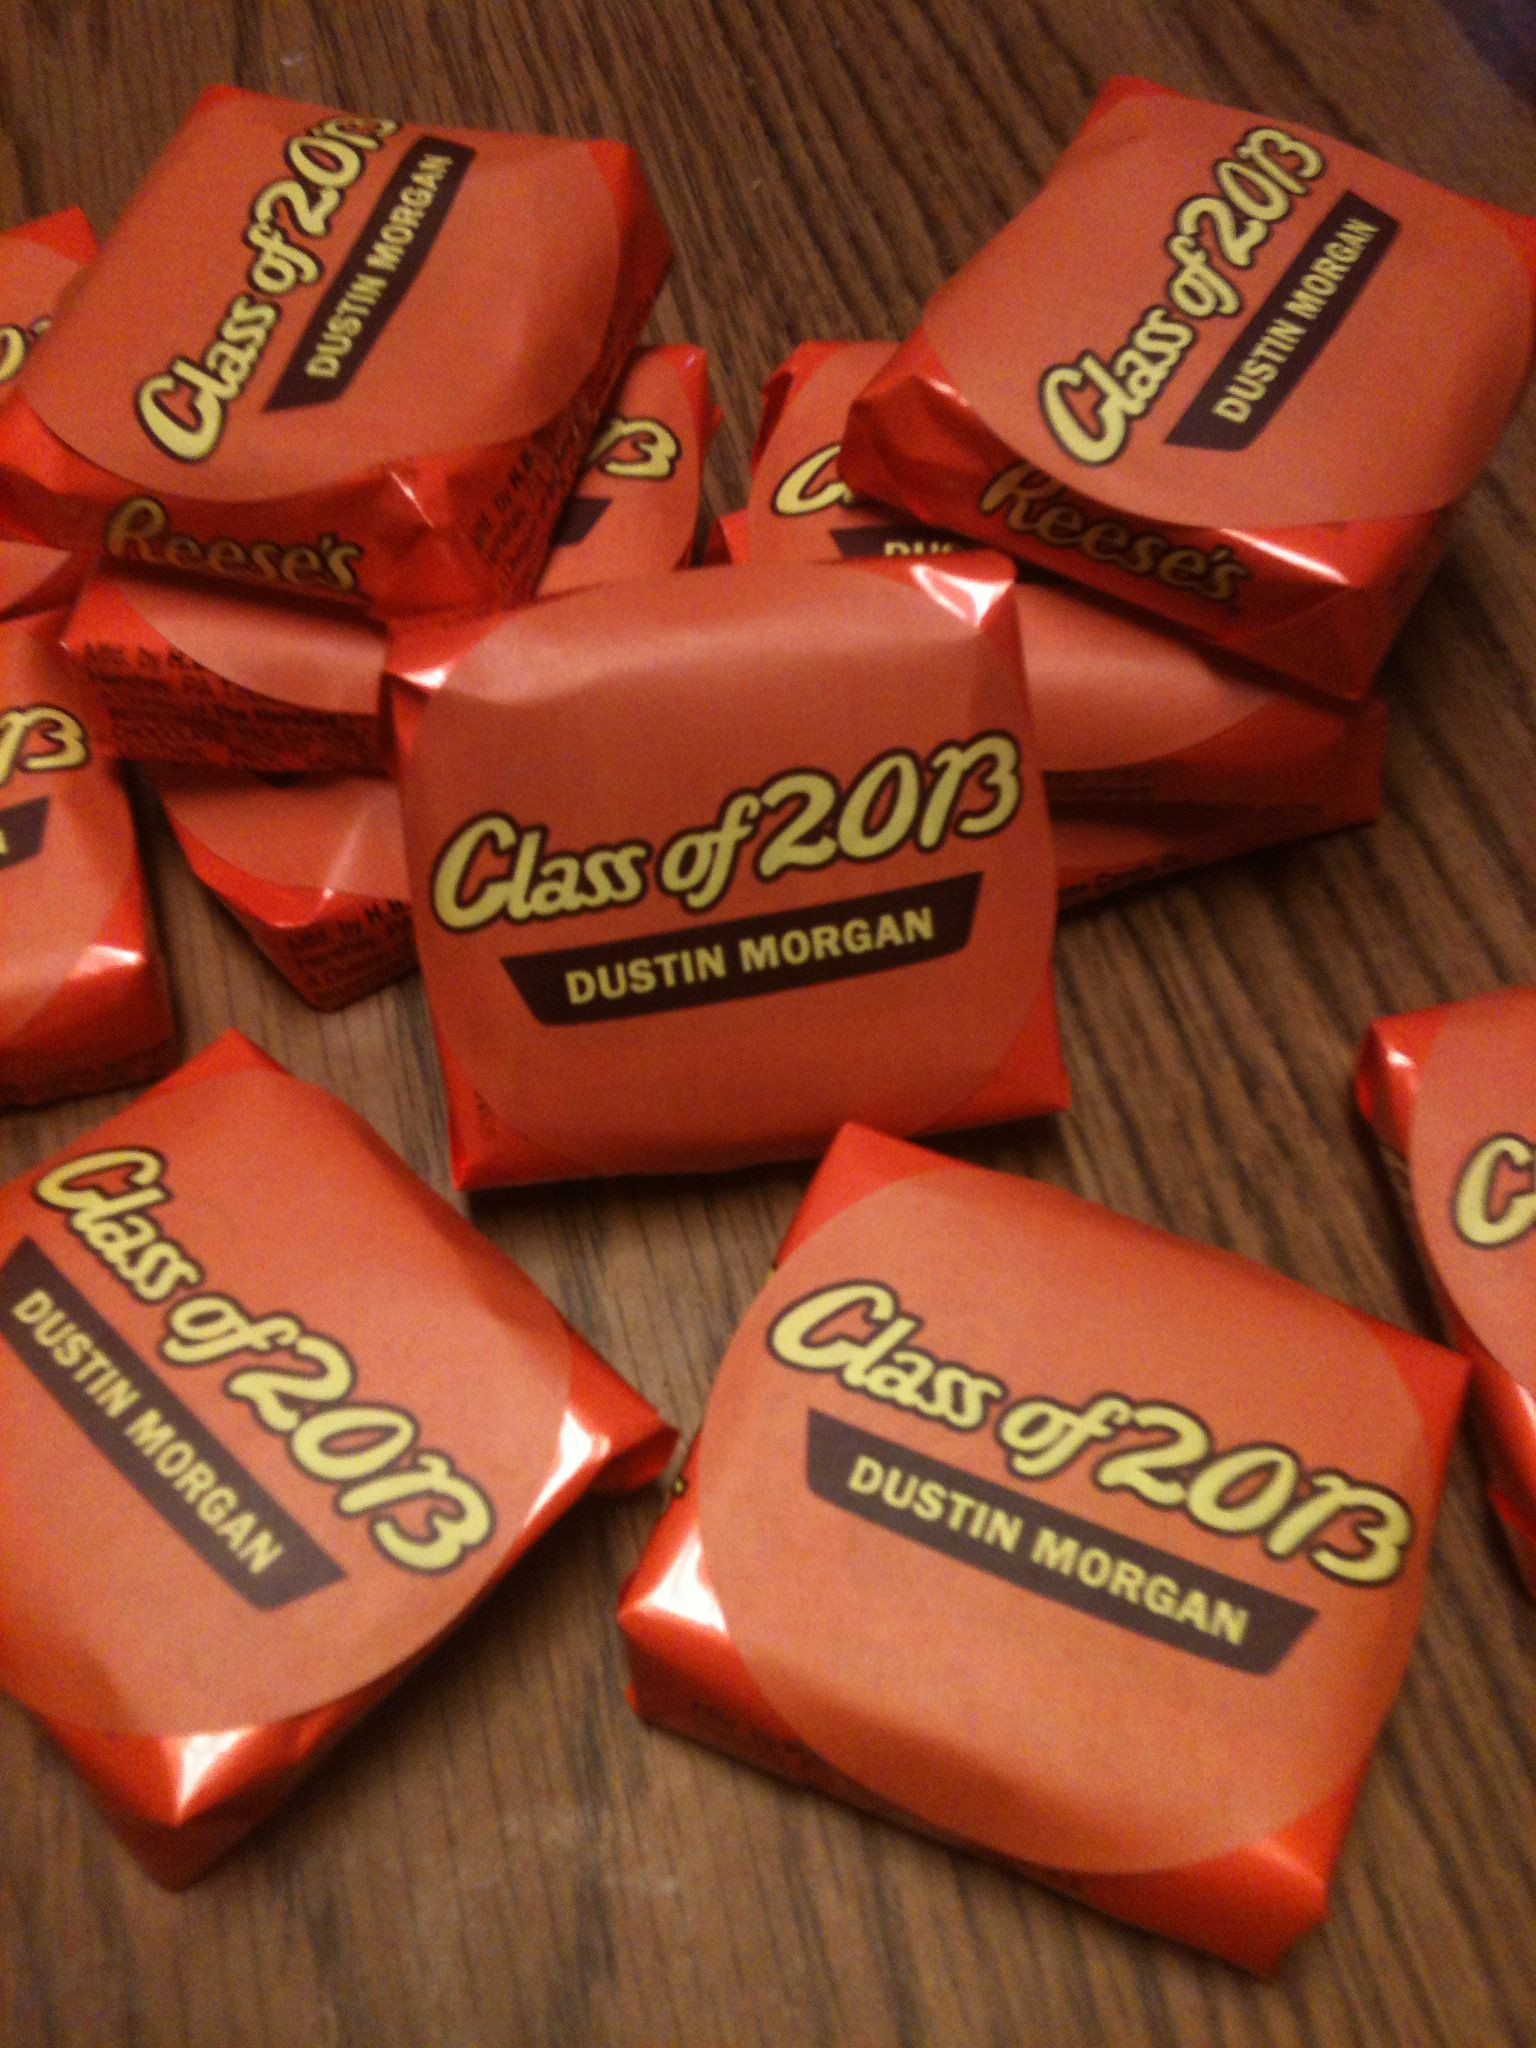 College Graduation Party Favor Ideas
 grad party favors all you need is to print stickers out